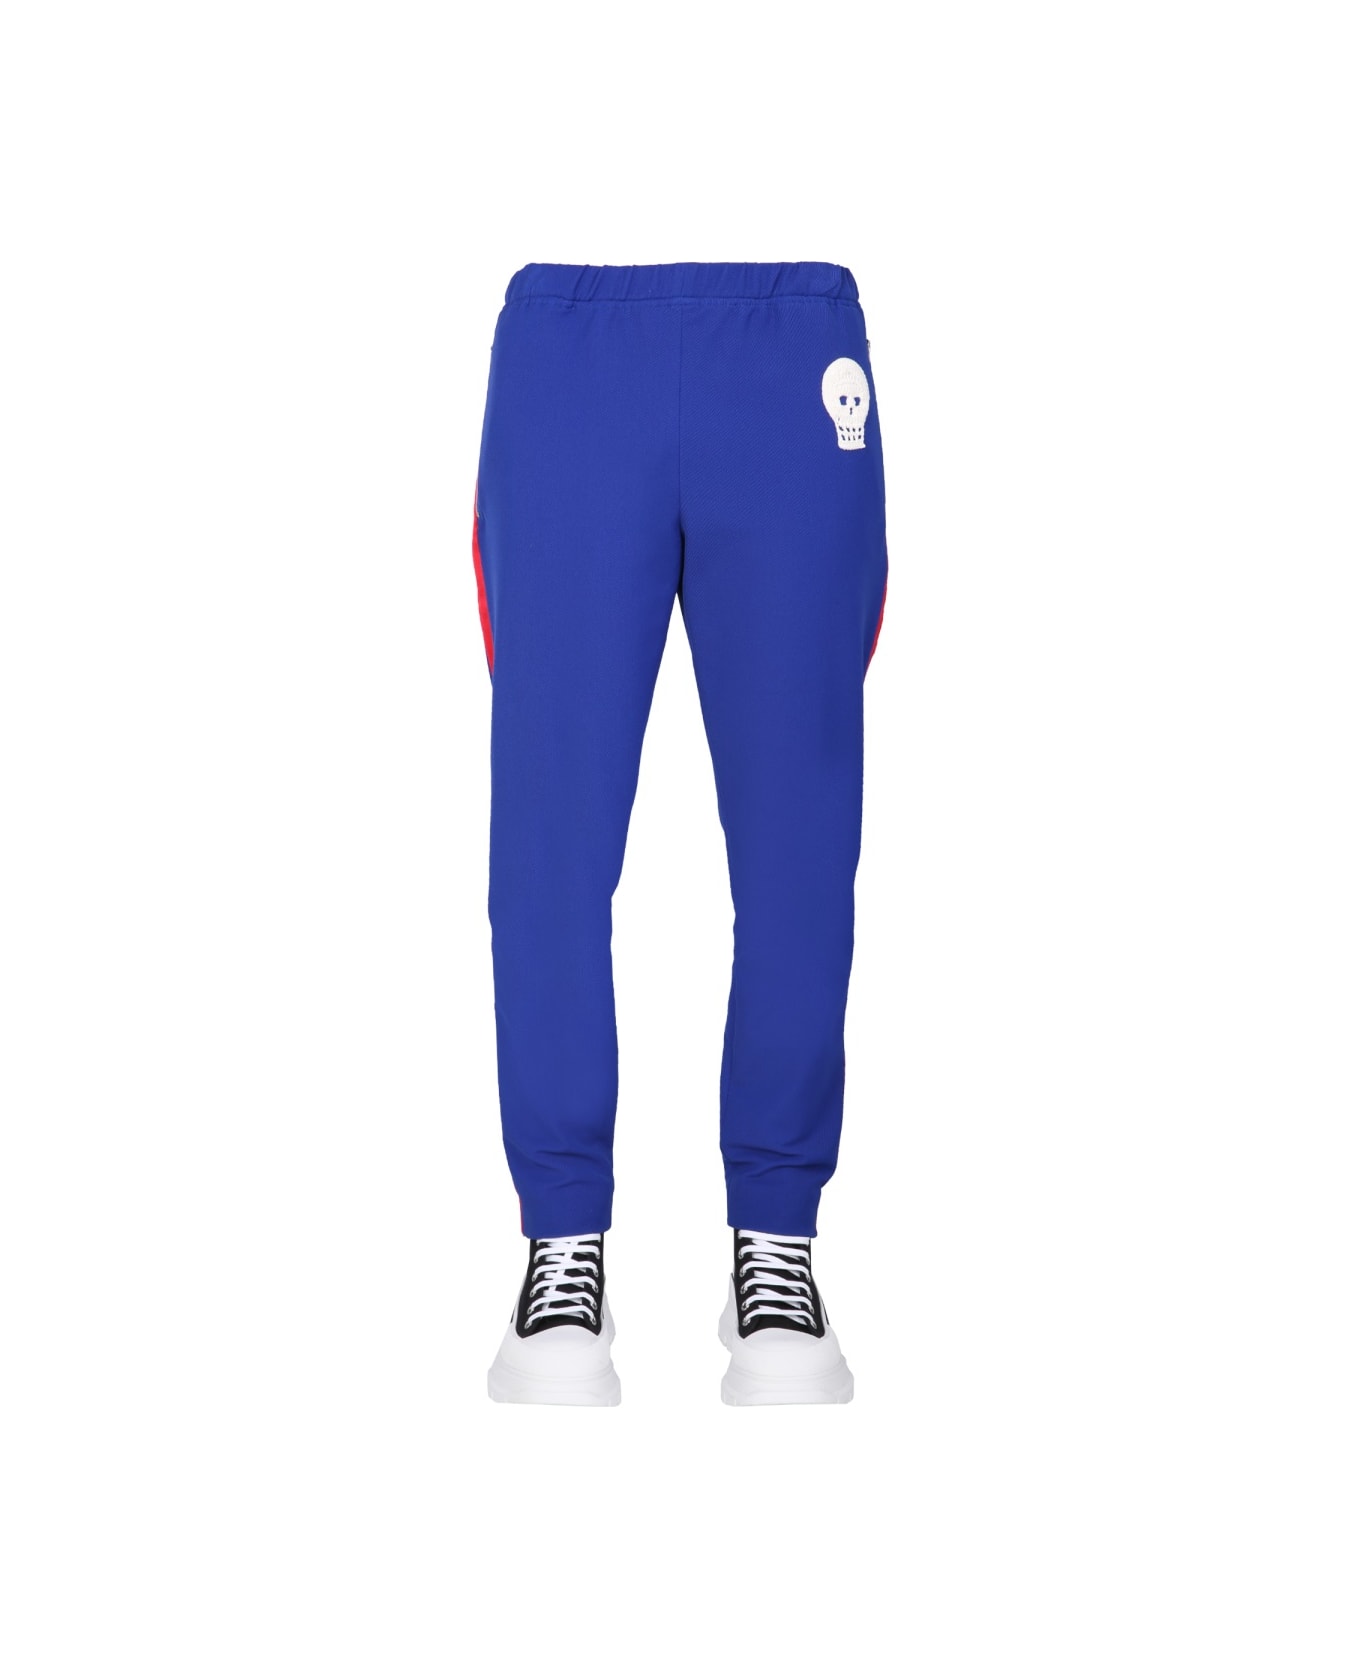 Alexander McQueen Jogging Pants With Embroidered Skull - BLUE